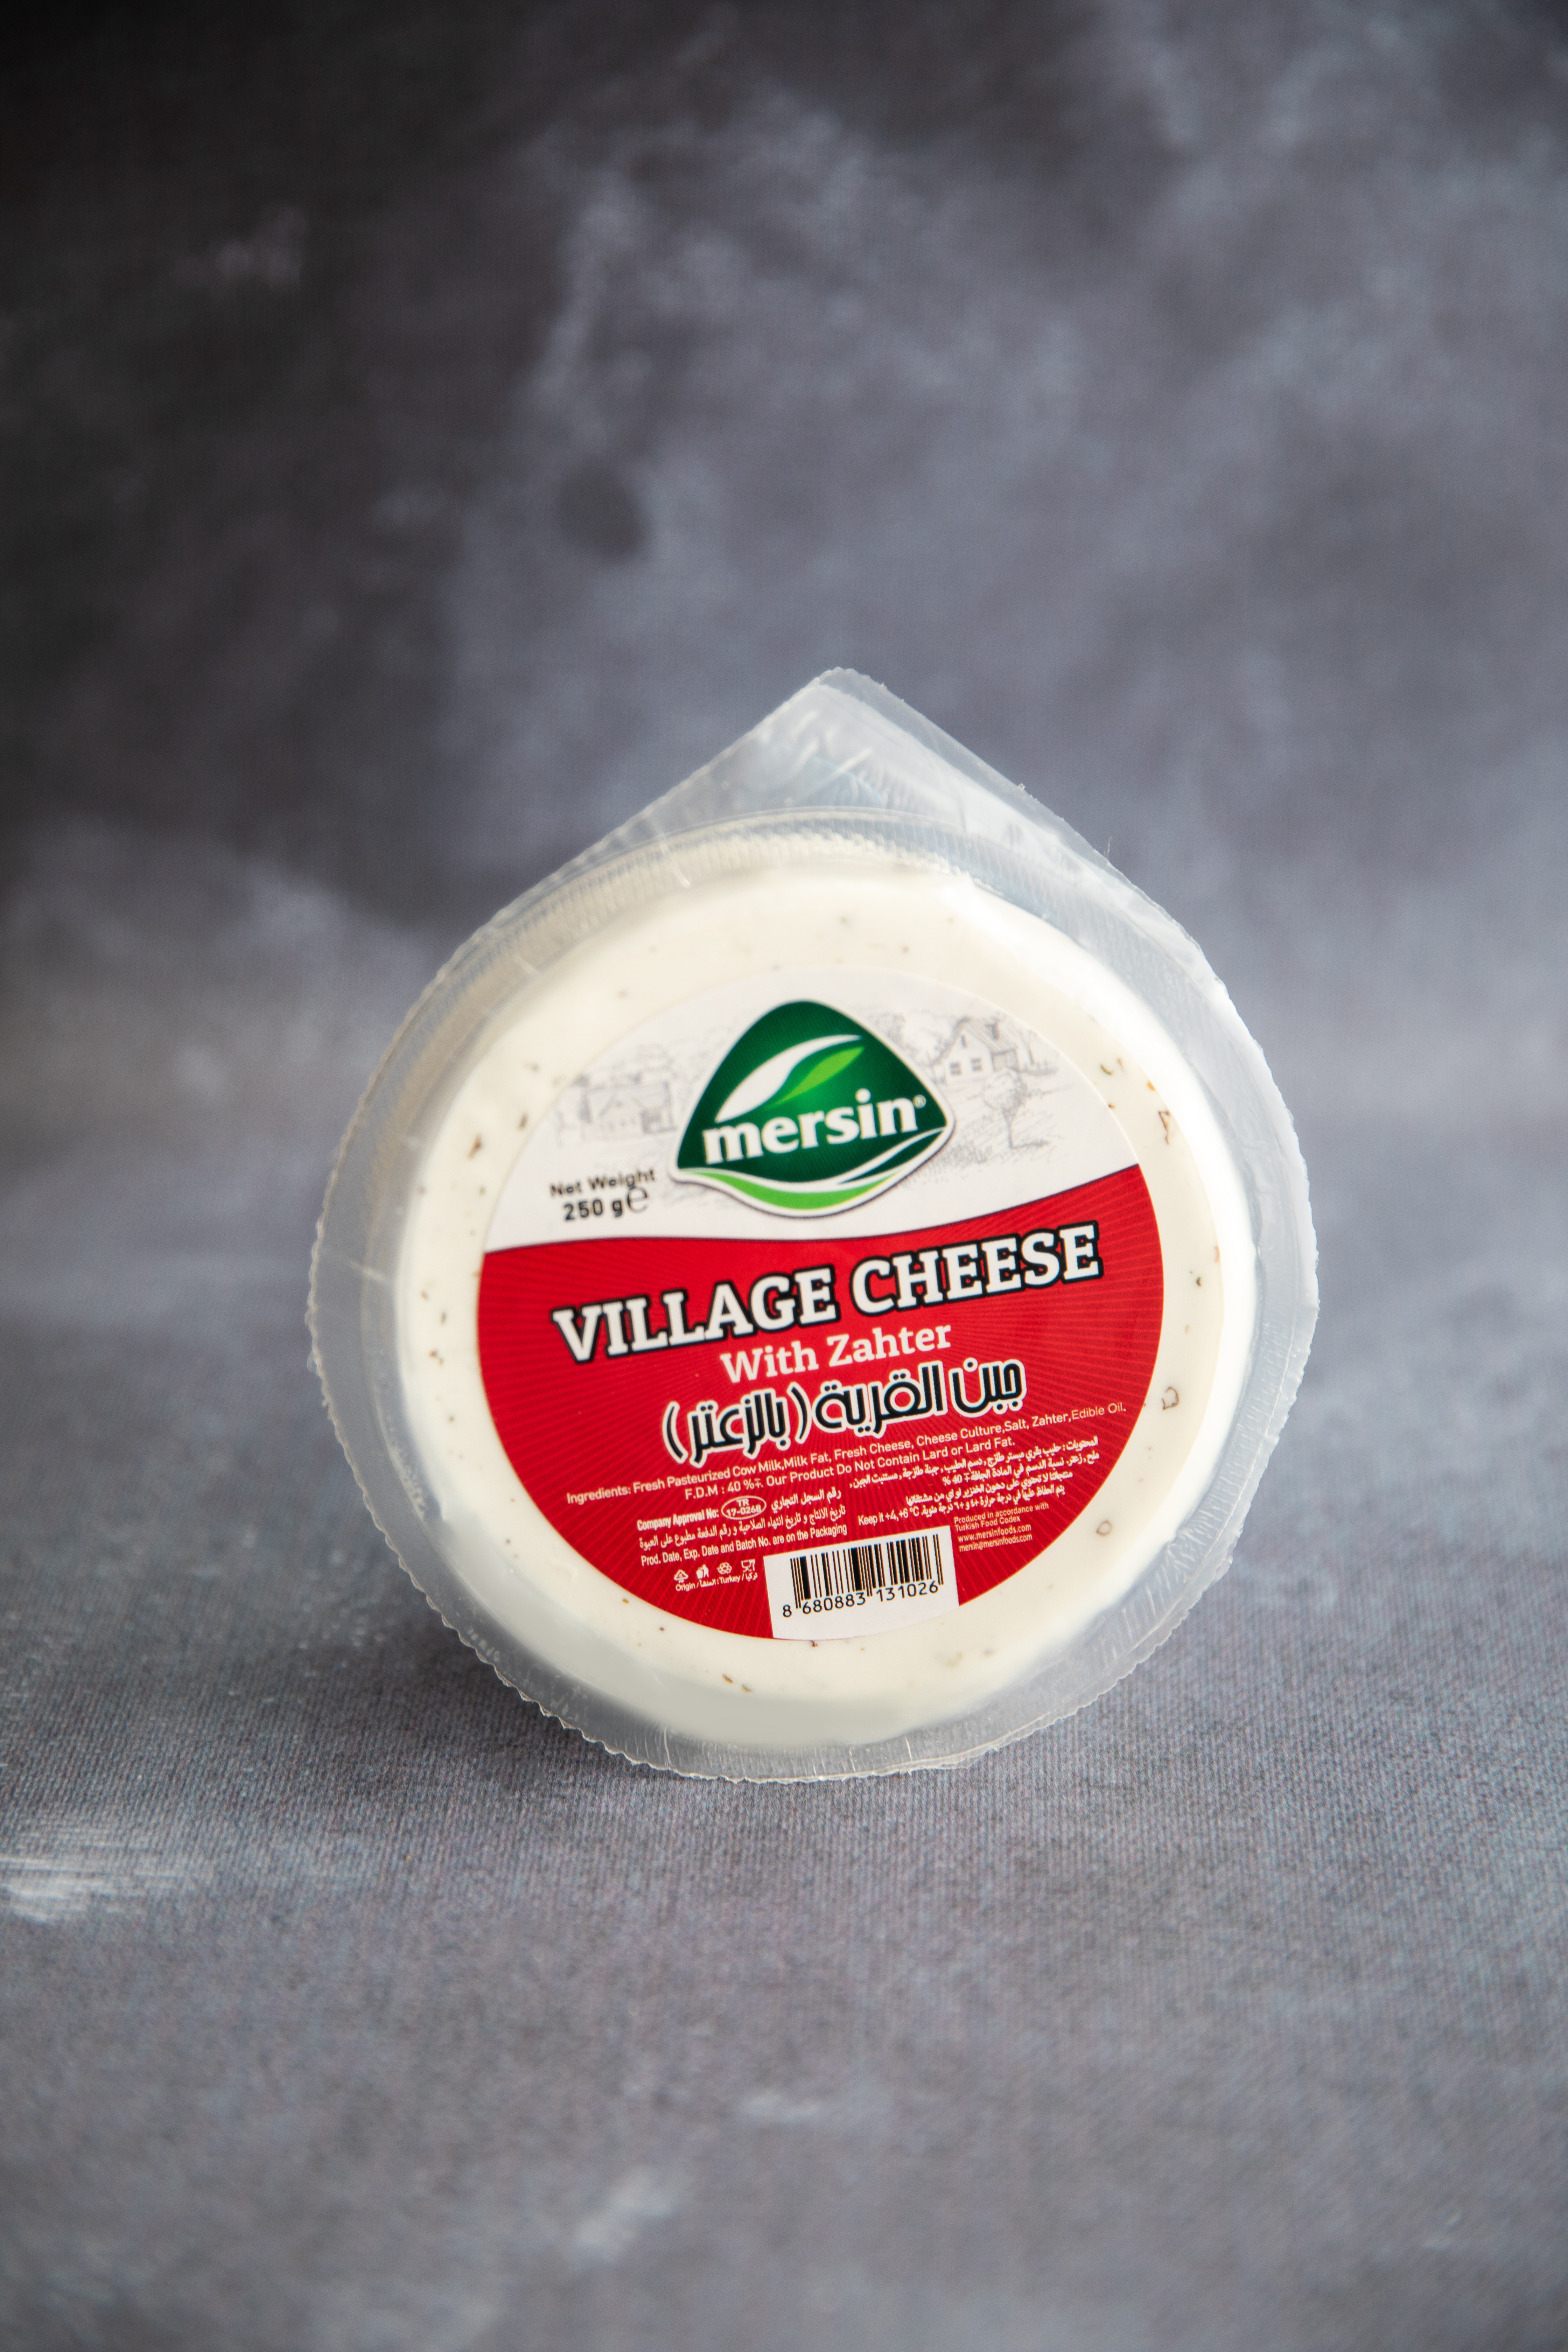 Mersin Village Cheese with Zahter 250 G